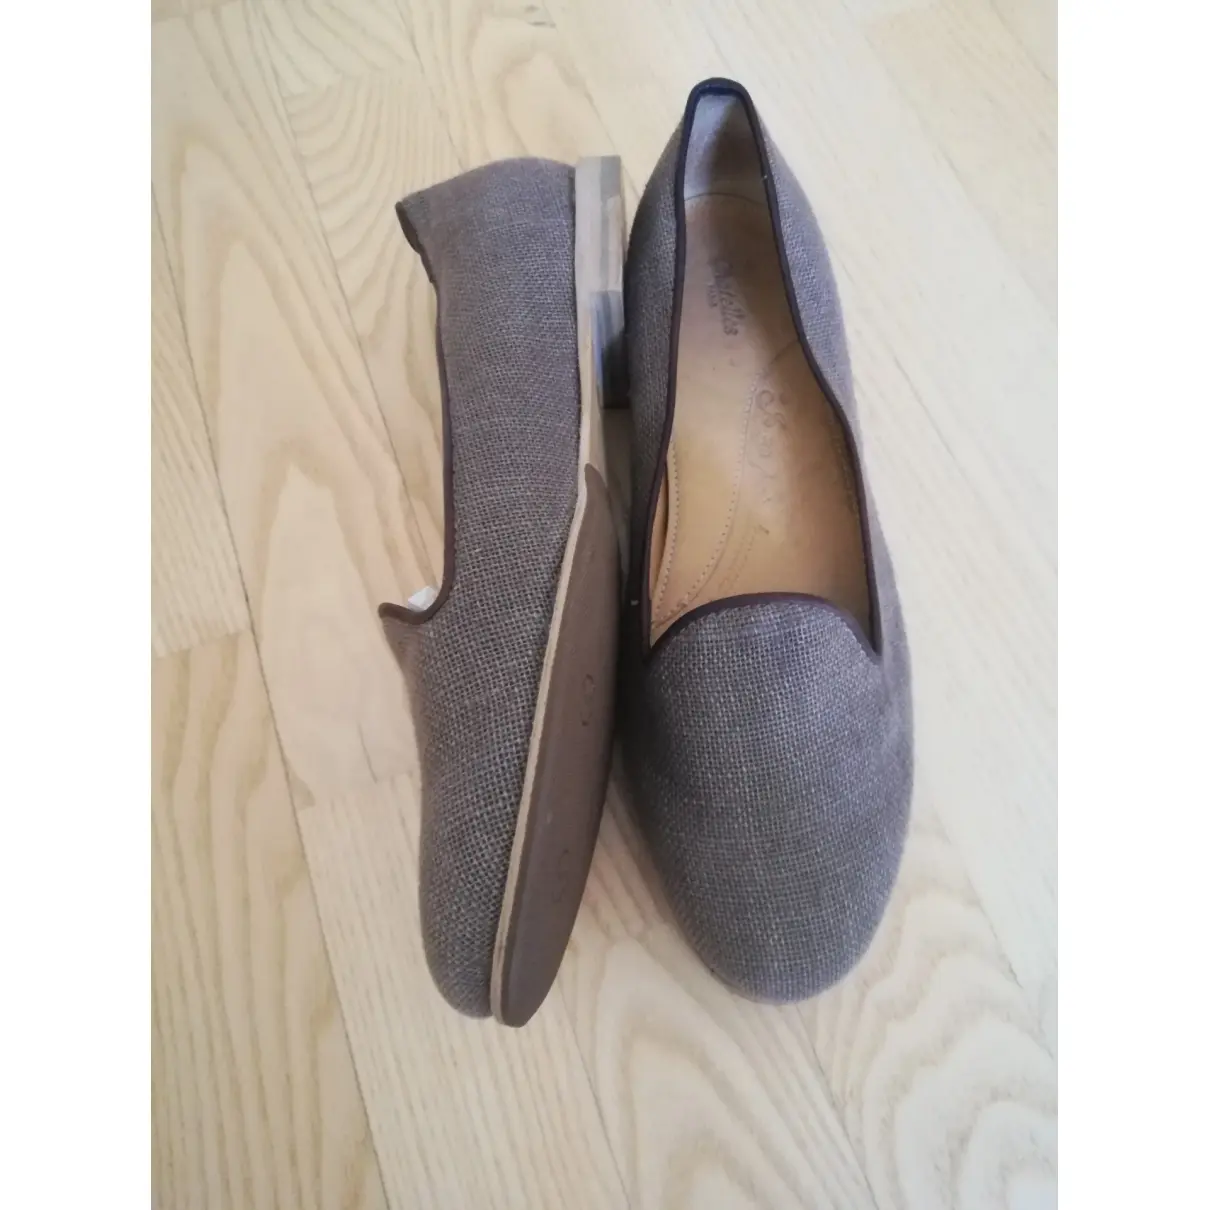 Buy Chatelles Leather flats online